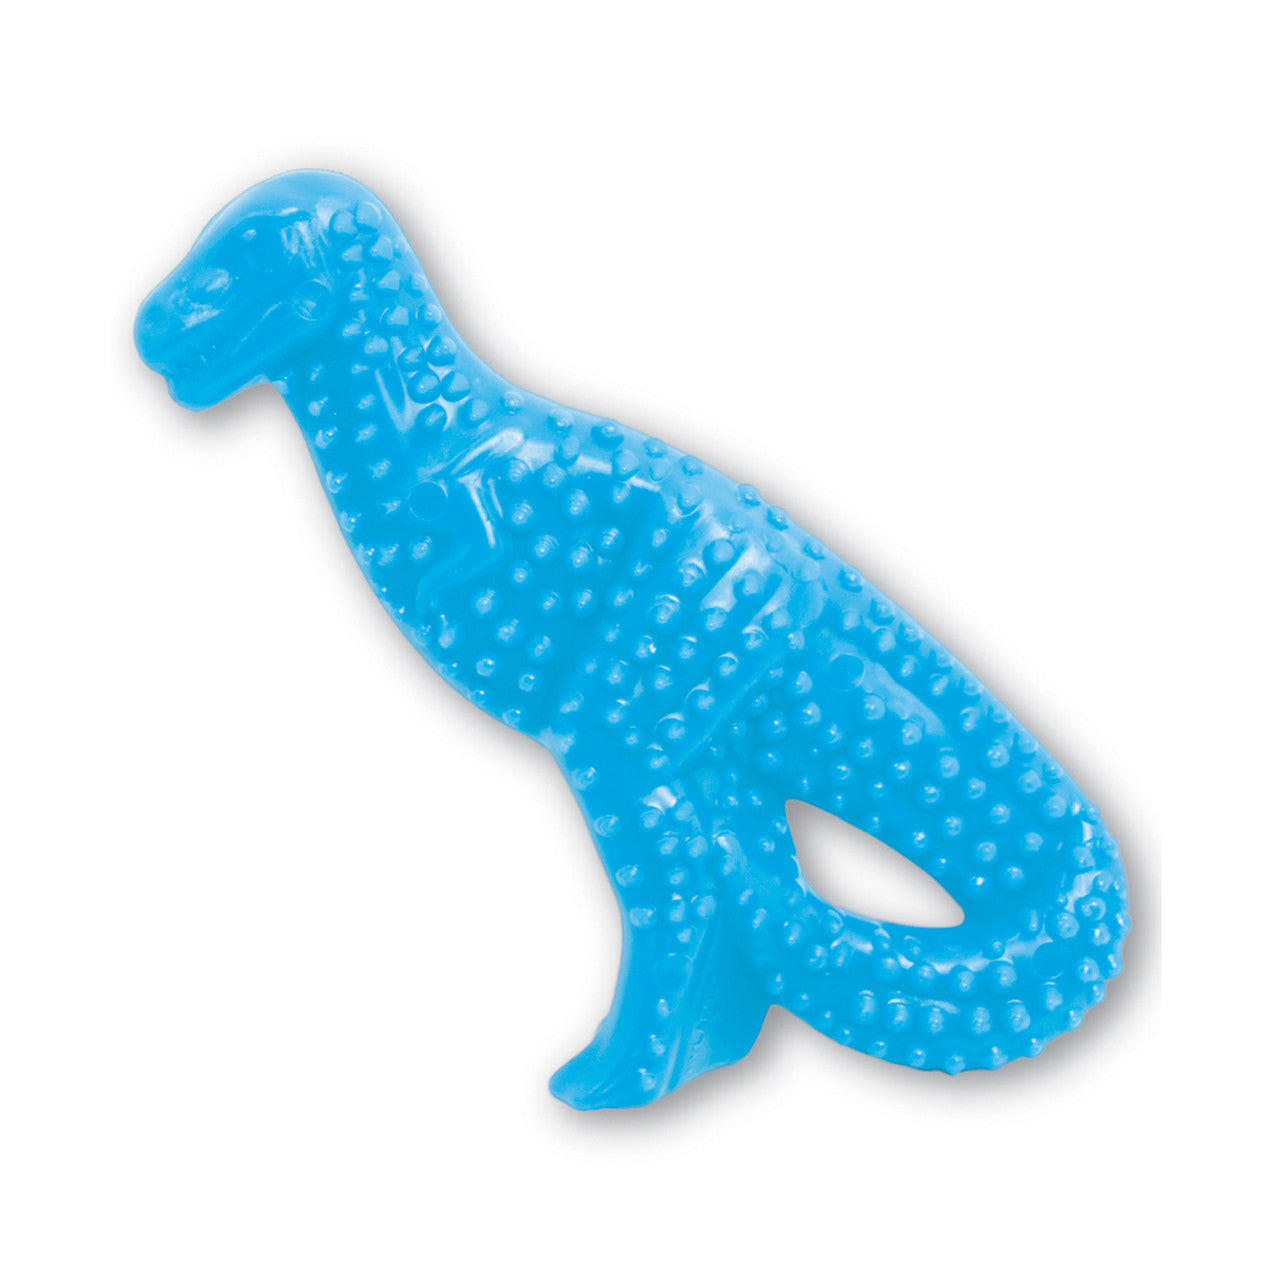 Nylabone Puppy Dental Dinosaur Chew Toy for Teething Puppies Chicken Small/Regular (1 Count)